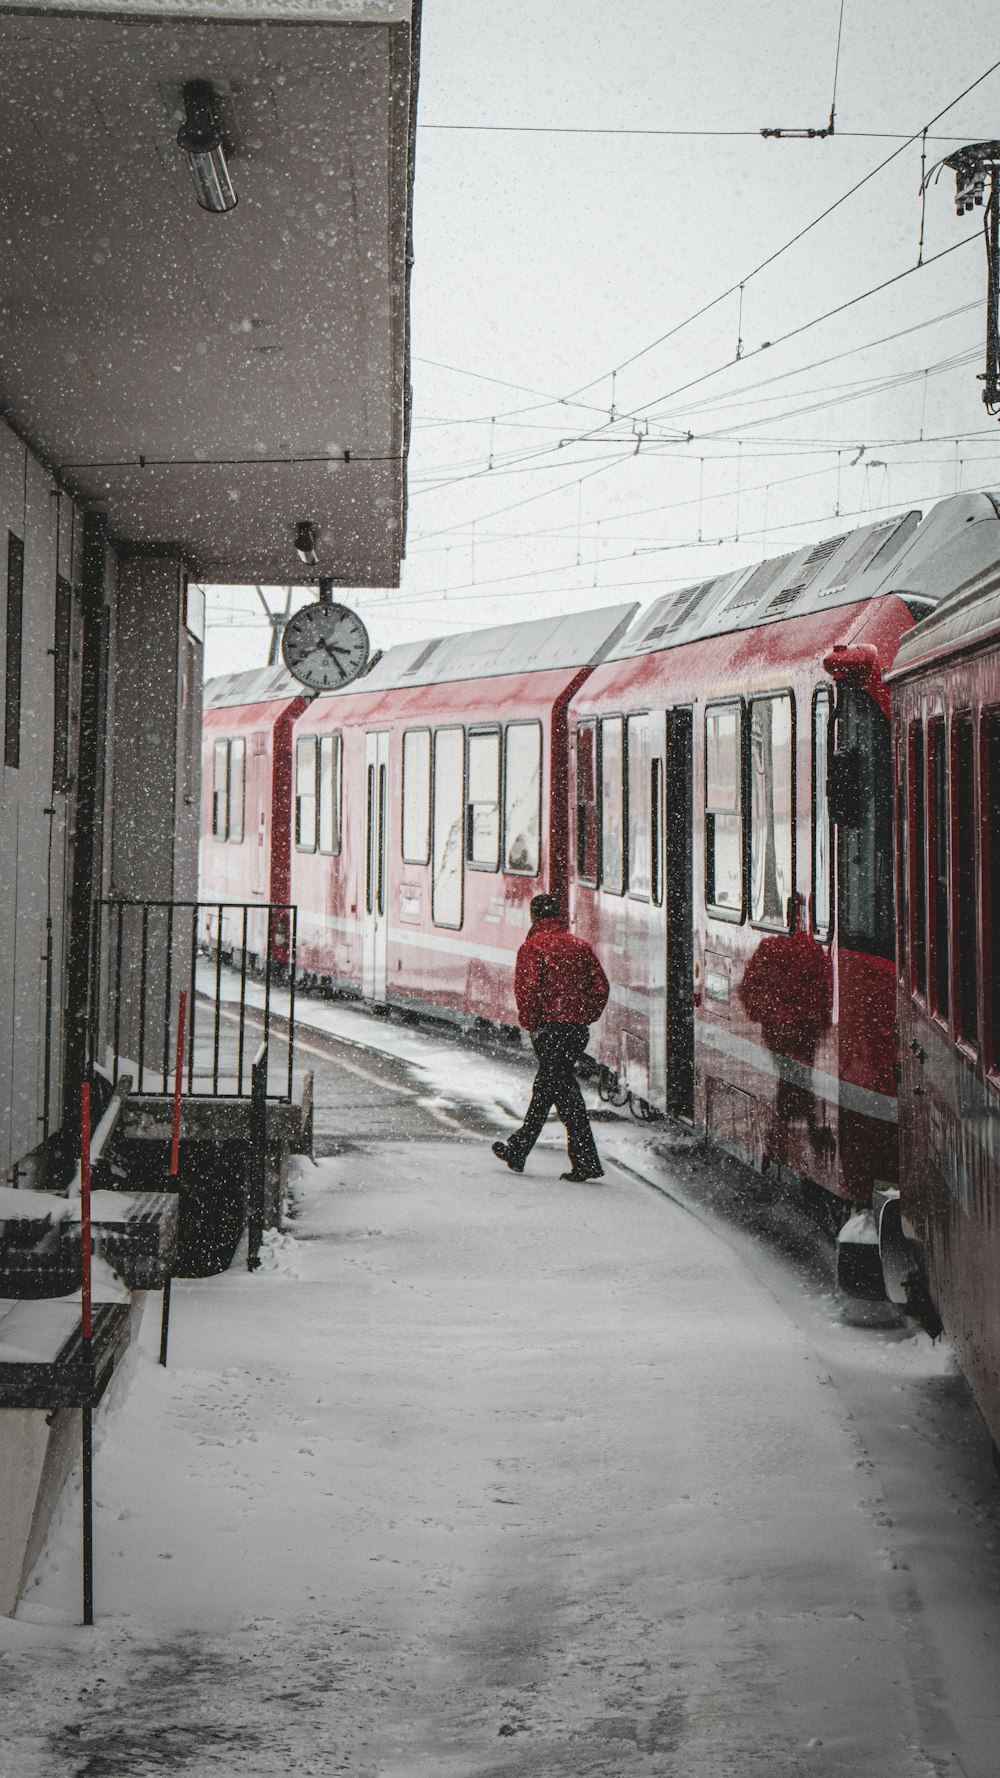 a person walking in the snow next to a train